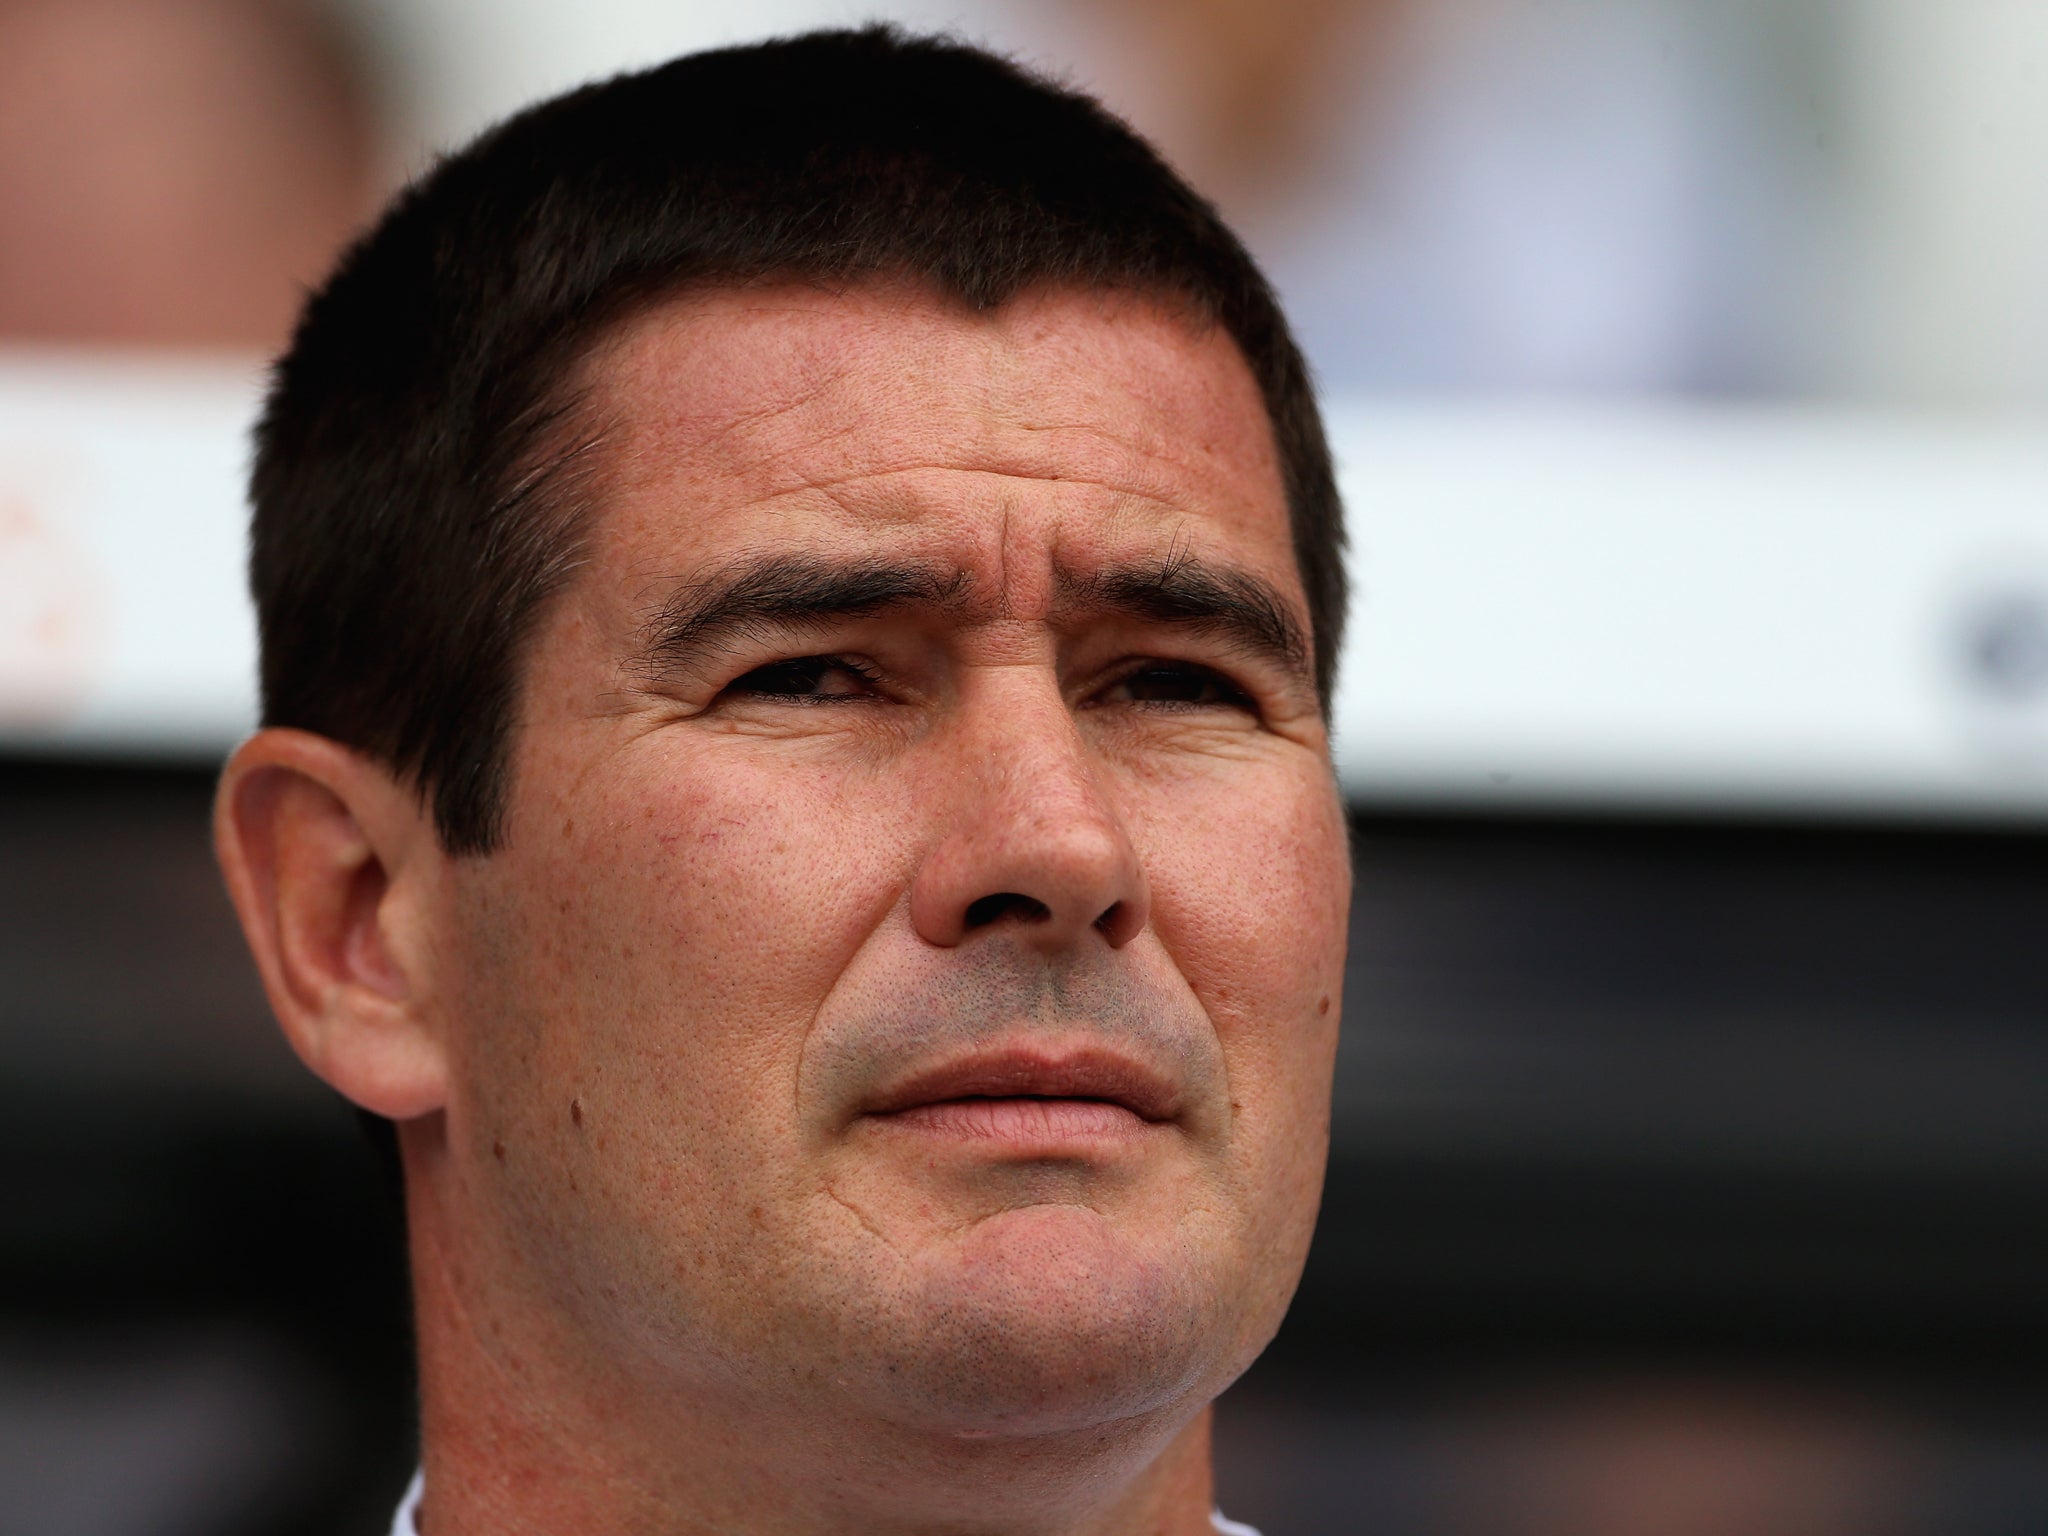 Sheffield United manager Nigel Clough looks on from the touchline